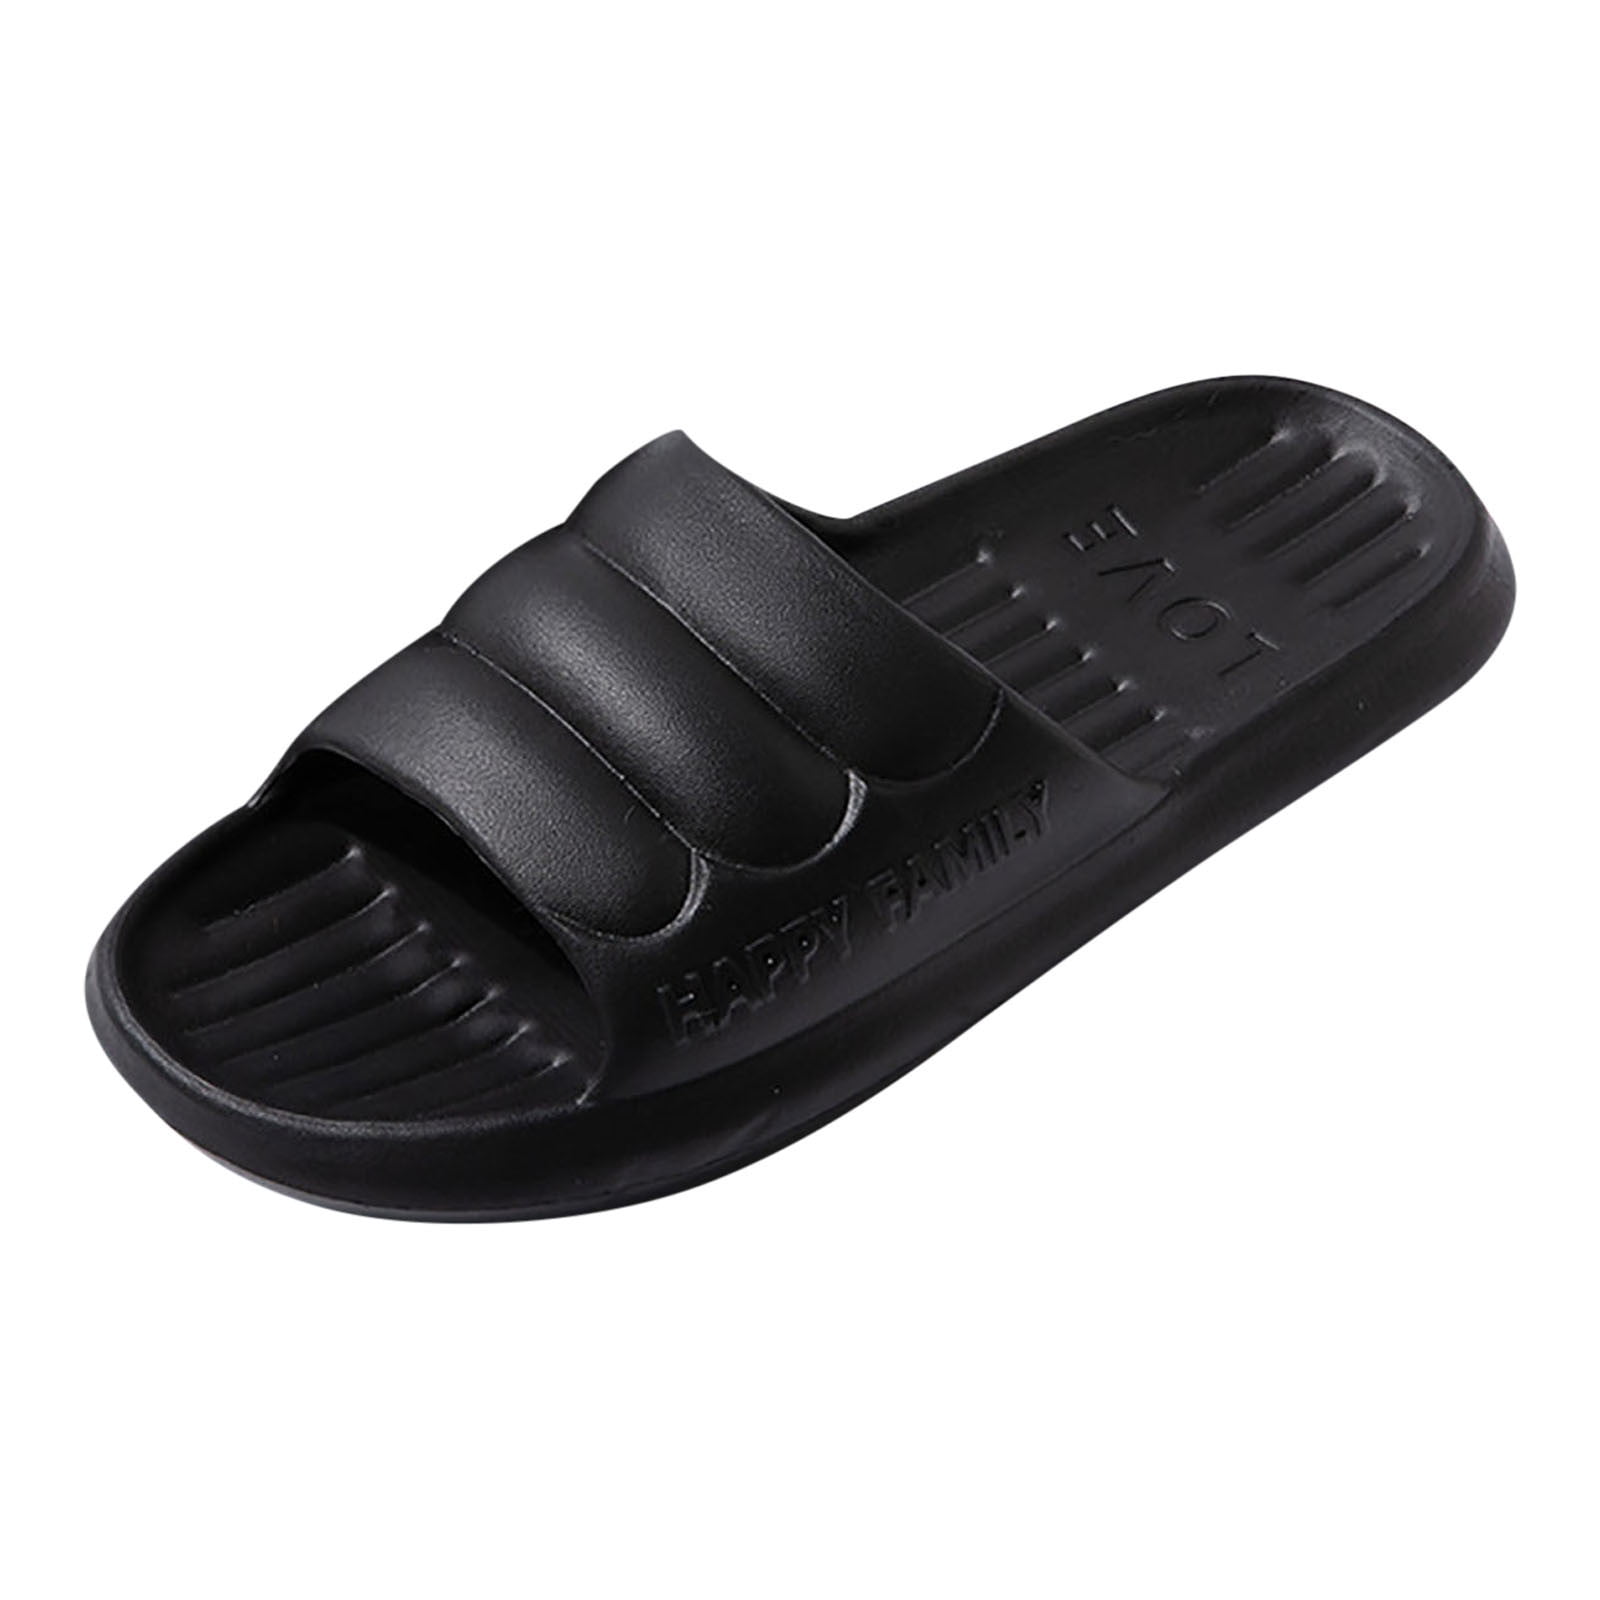 ASEIDFNSA Soft Leather Shoes Men Mens Wide Slippers 11 Men Slippers ...